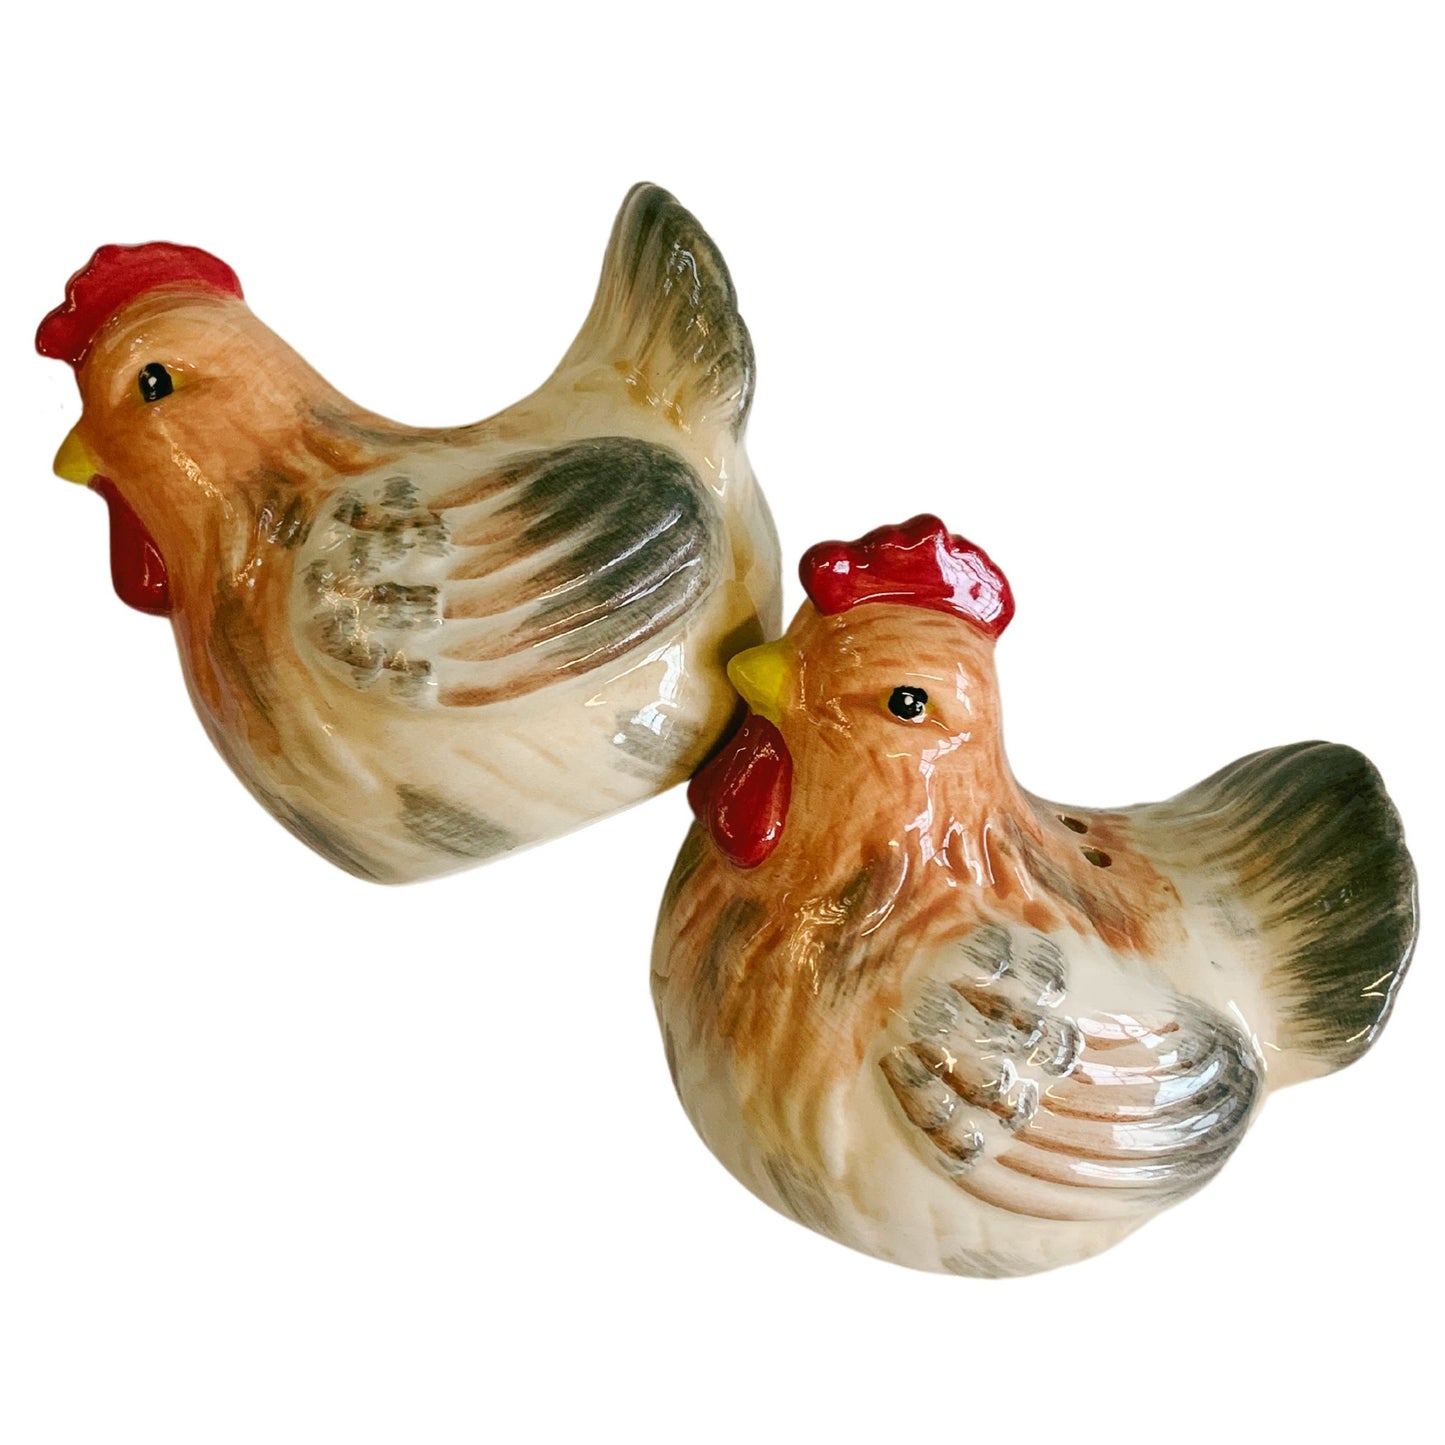 Cute Chicks Salt & Pepper Shakers Set | Seasoning Dispensers | Condiments Container